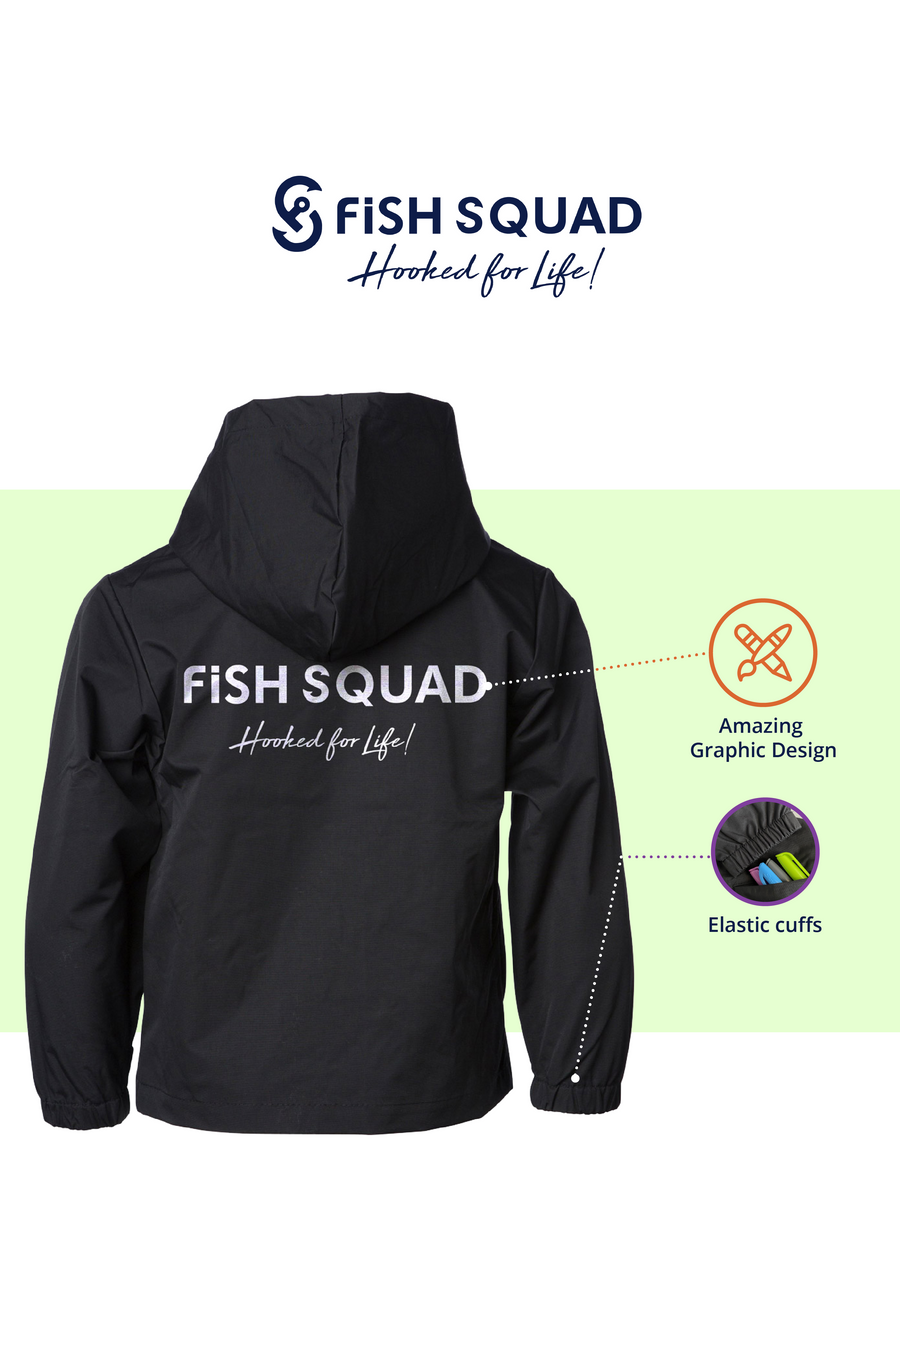 Fish Squad - Hooked For Life - Youth Outdoor Sport Rainjacket